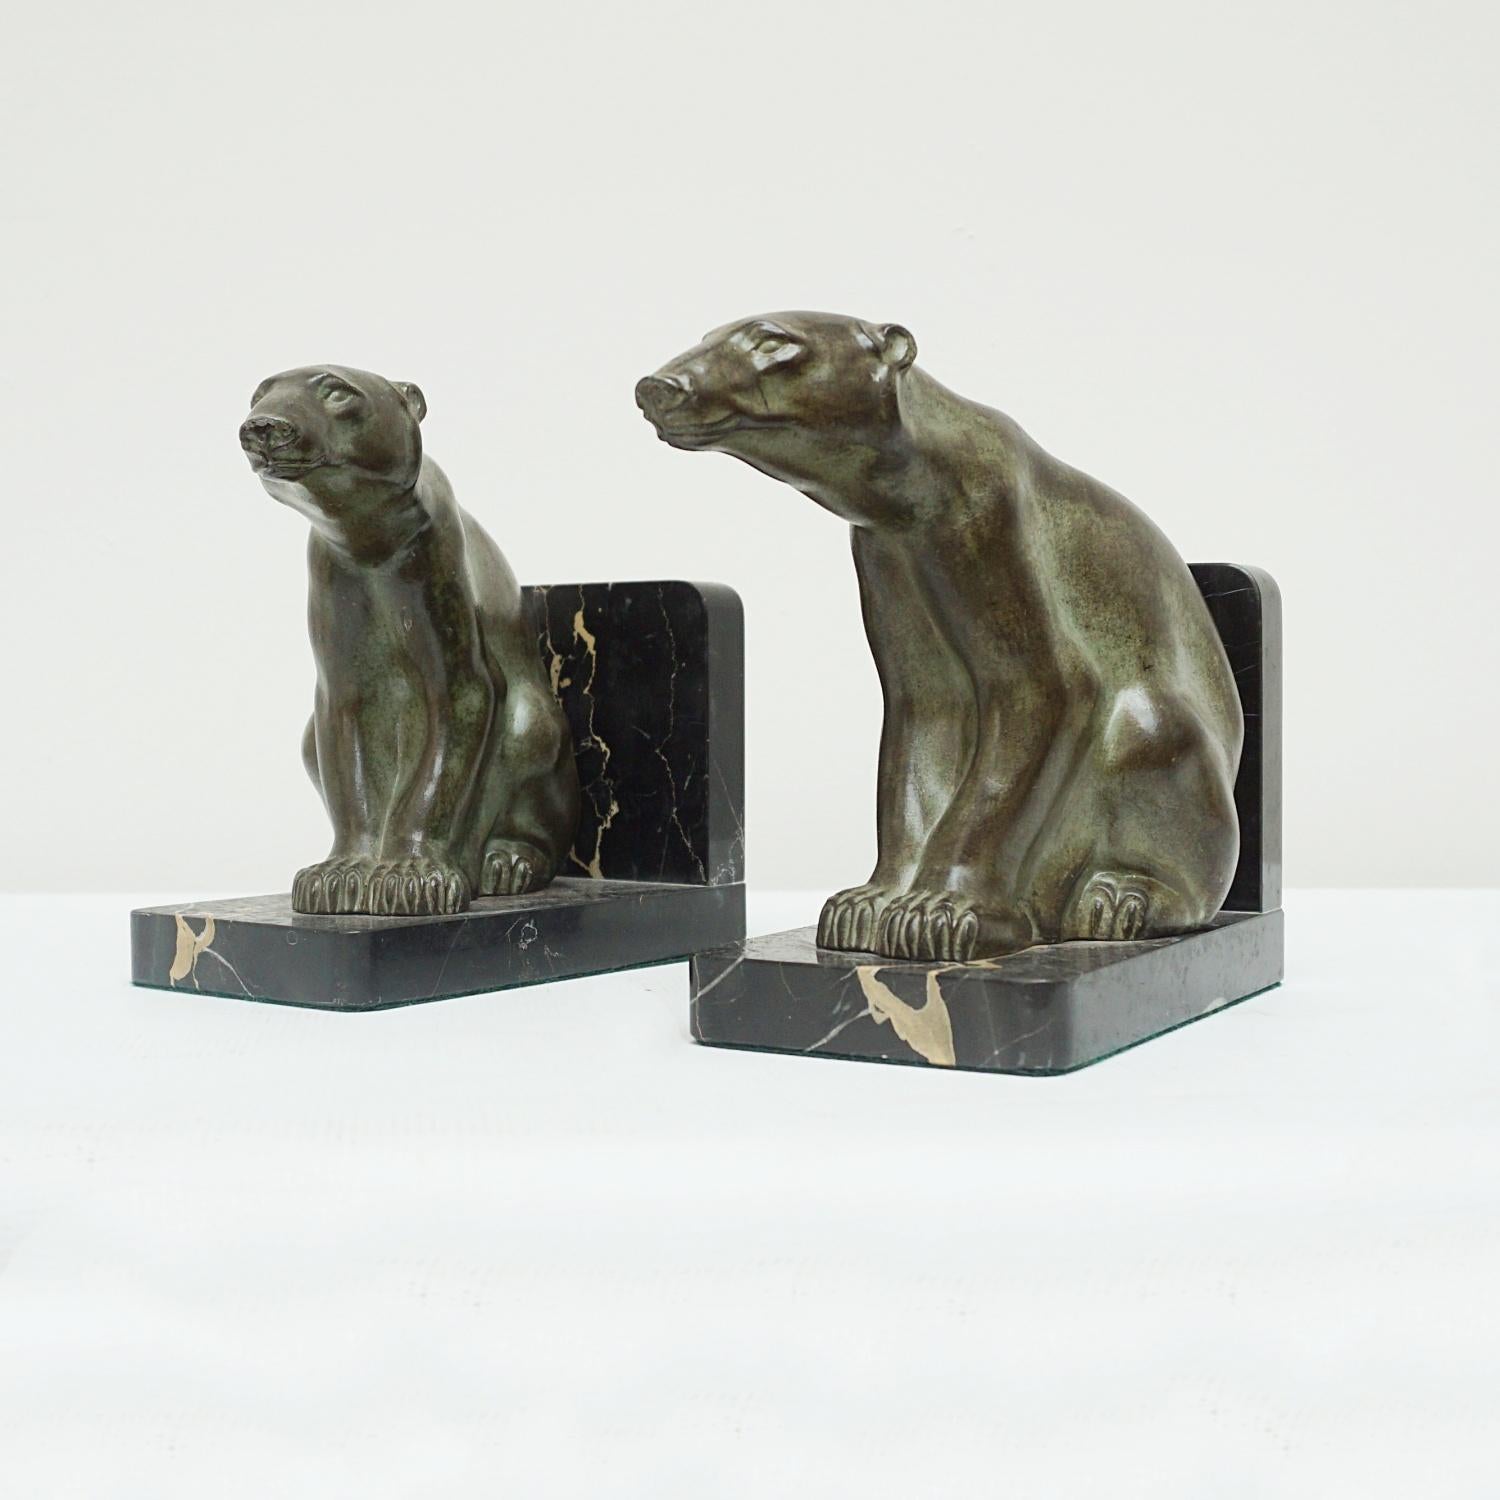 A pair of Art Deco Polar Bear bookends. Two Polar Bears looking outwards seated on marble bases. Spelter and marble. Signed M. Font to back of Polar Bear. 

Dimensions: 16cm W 9cm D 6.5cm

Origin: French

Date: Circa 1930

Item Number: